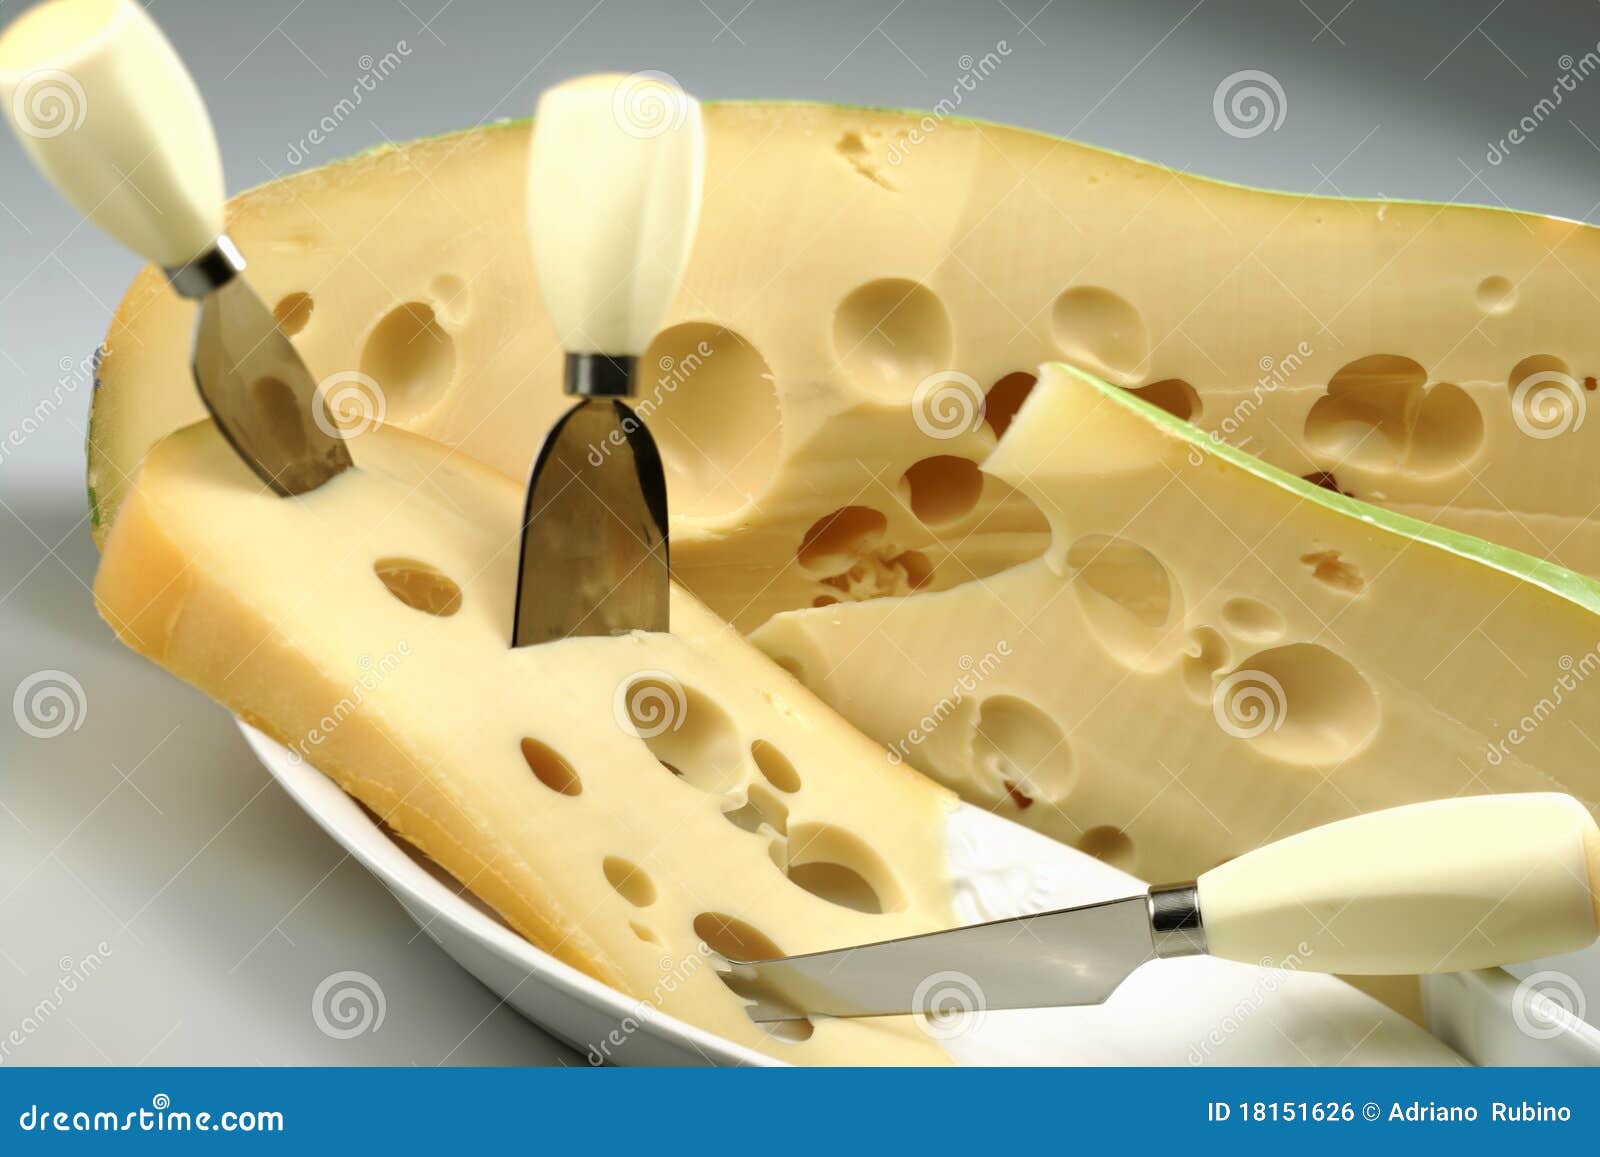 Cheese stock photo. Image of hole, diet, cheese, calories - 18151626